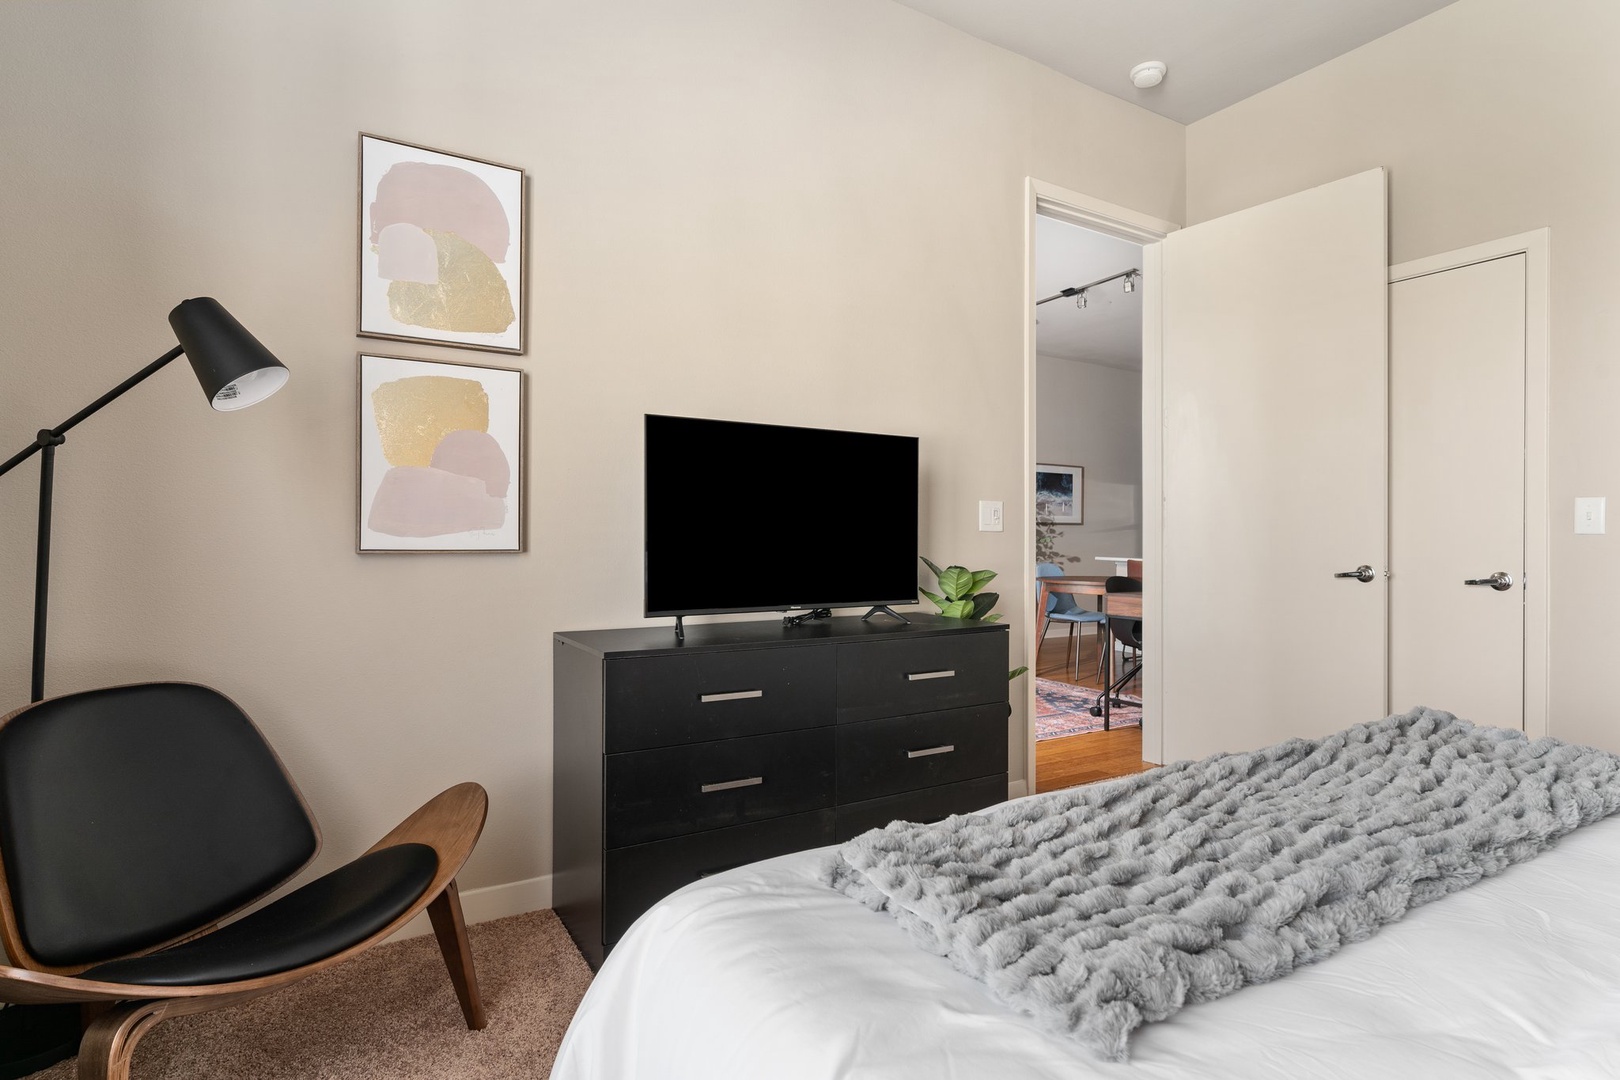 Relax in luxury on a memory foam mattress within this welcoming bedroom featuring a smart TV.